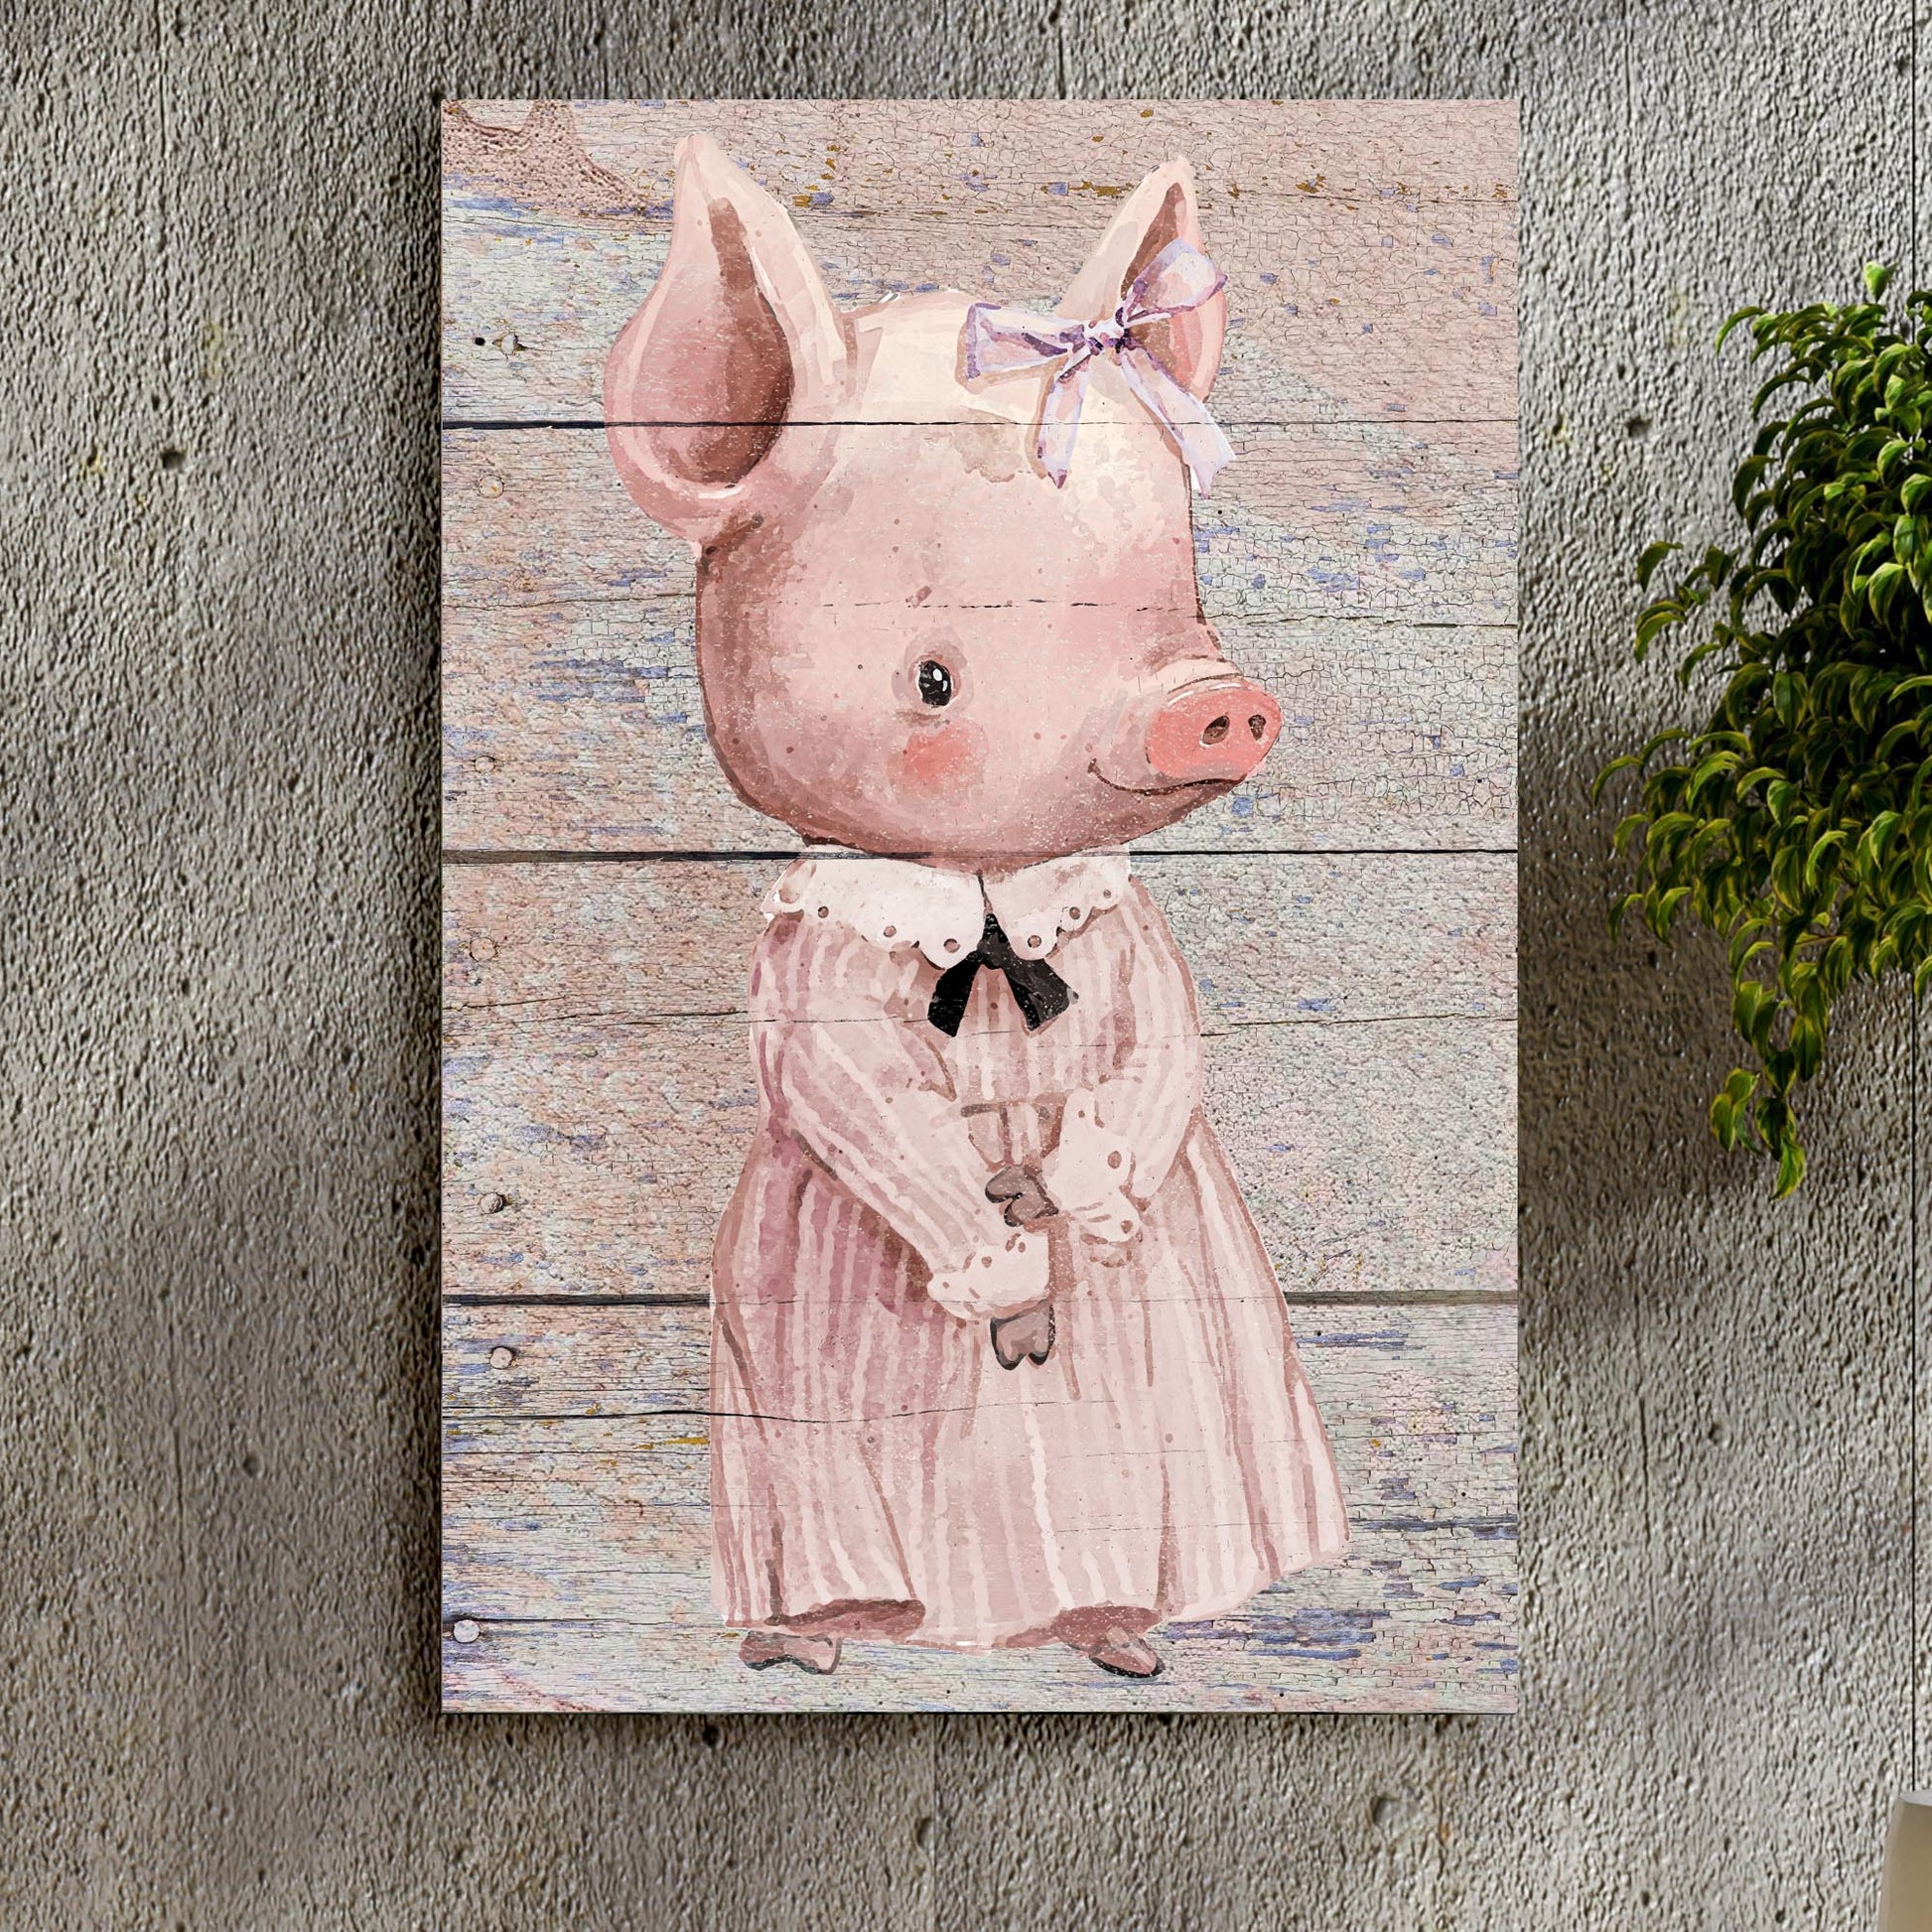 Simple Ribbon Dress Pig Canvas Wall Art - Image by Tailored Canvases